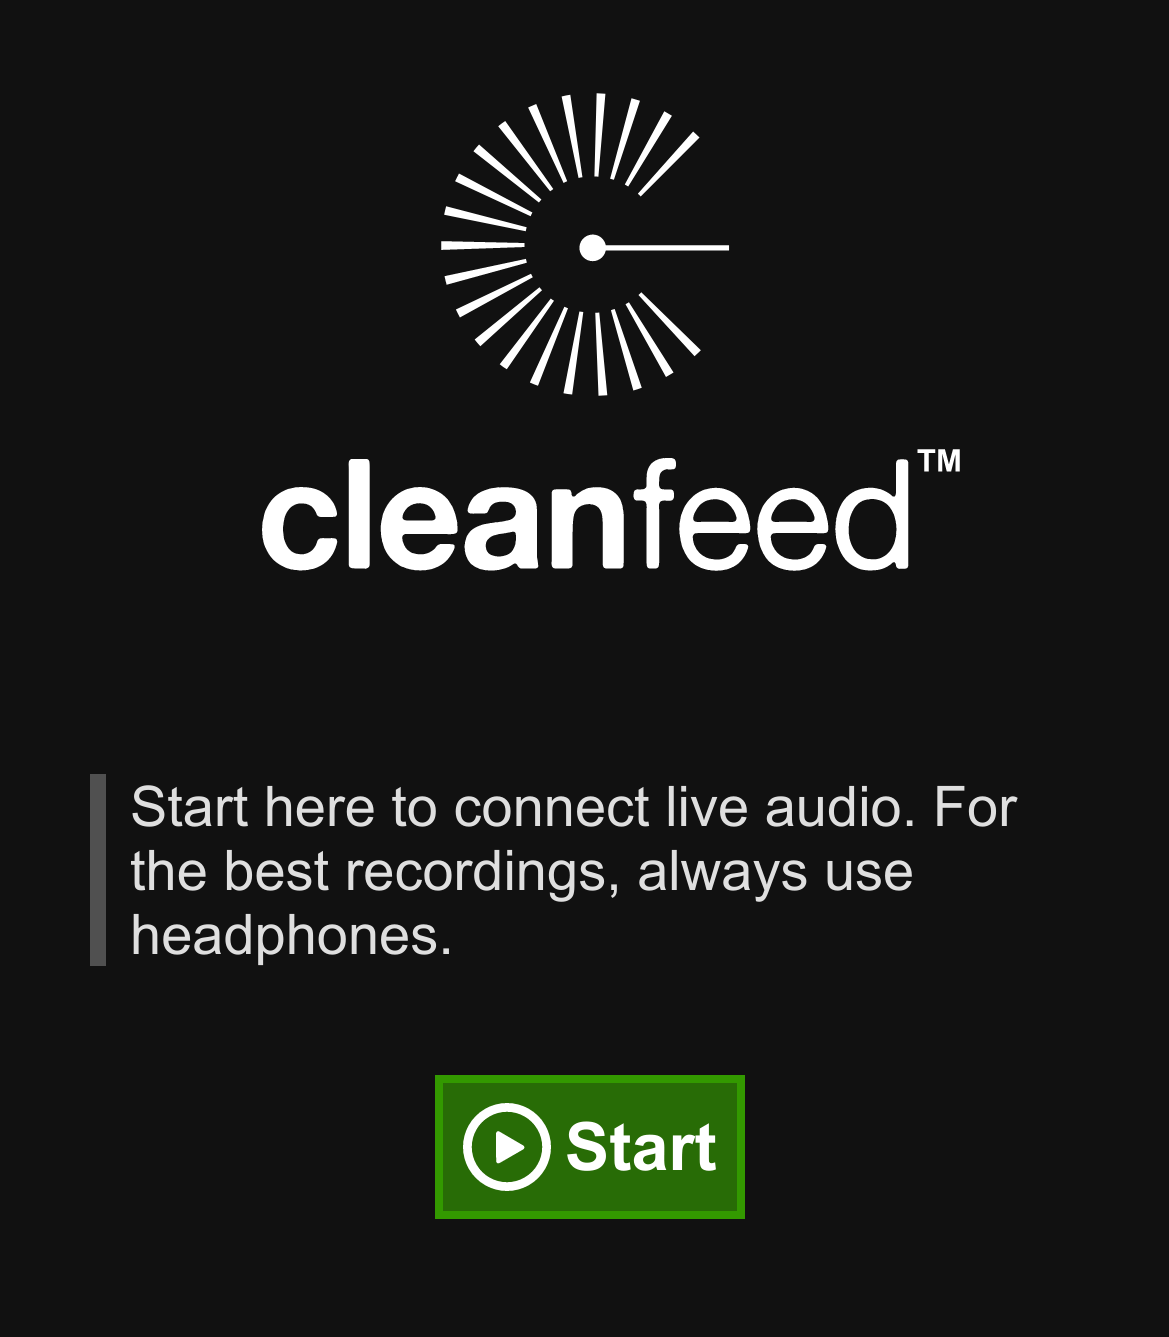 Illustration of Cleanfeed guest login with the text "Start here to connect live audio. For the best recordings, always use headphones."